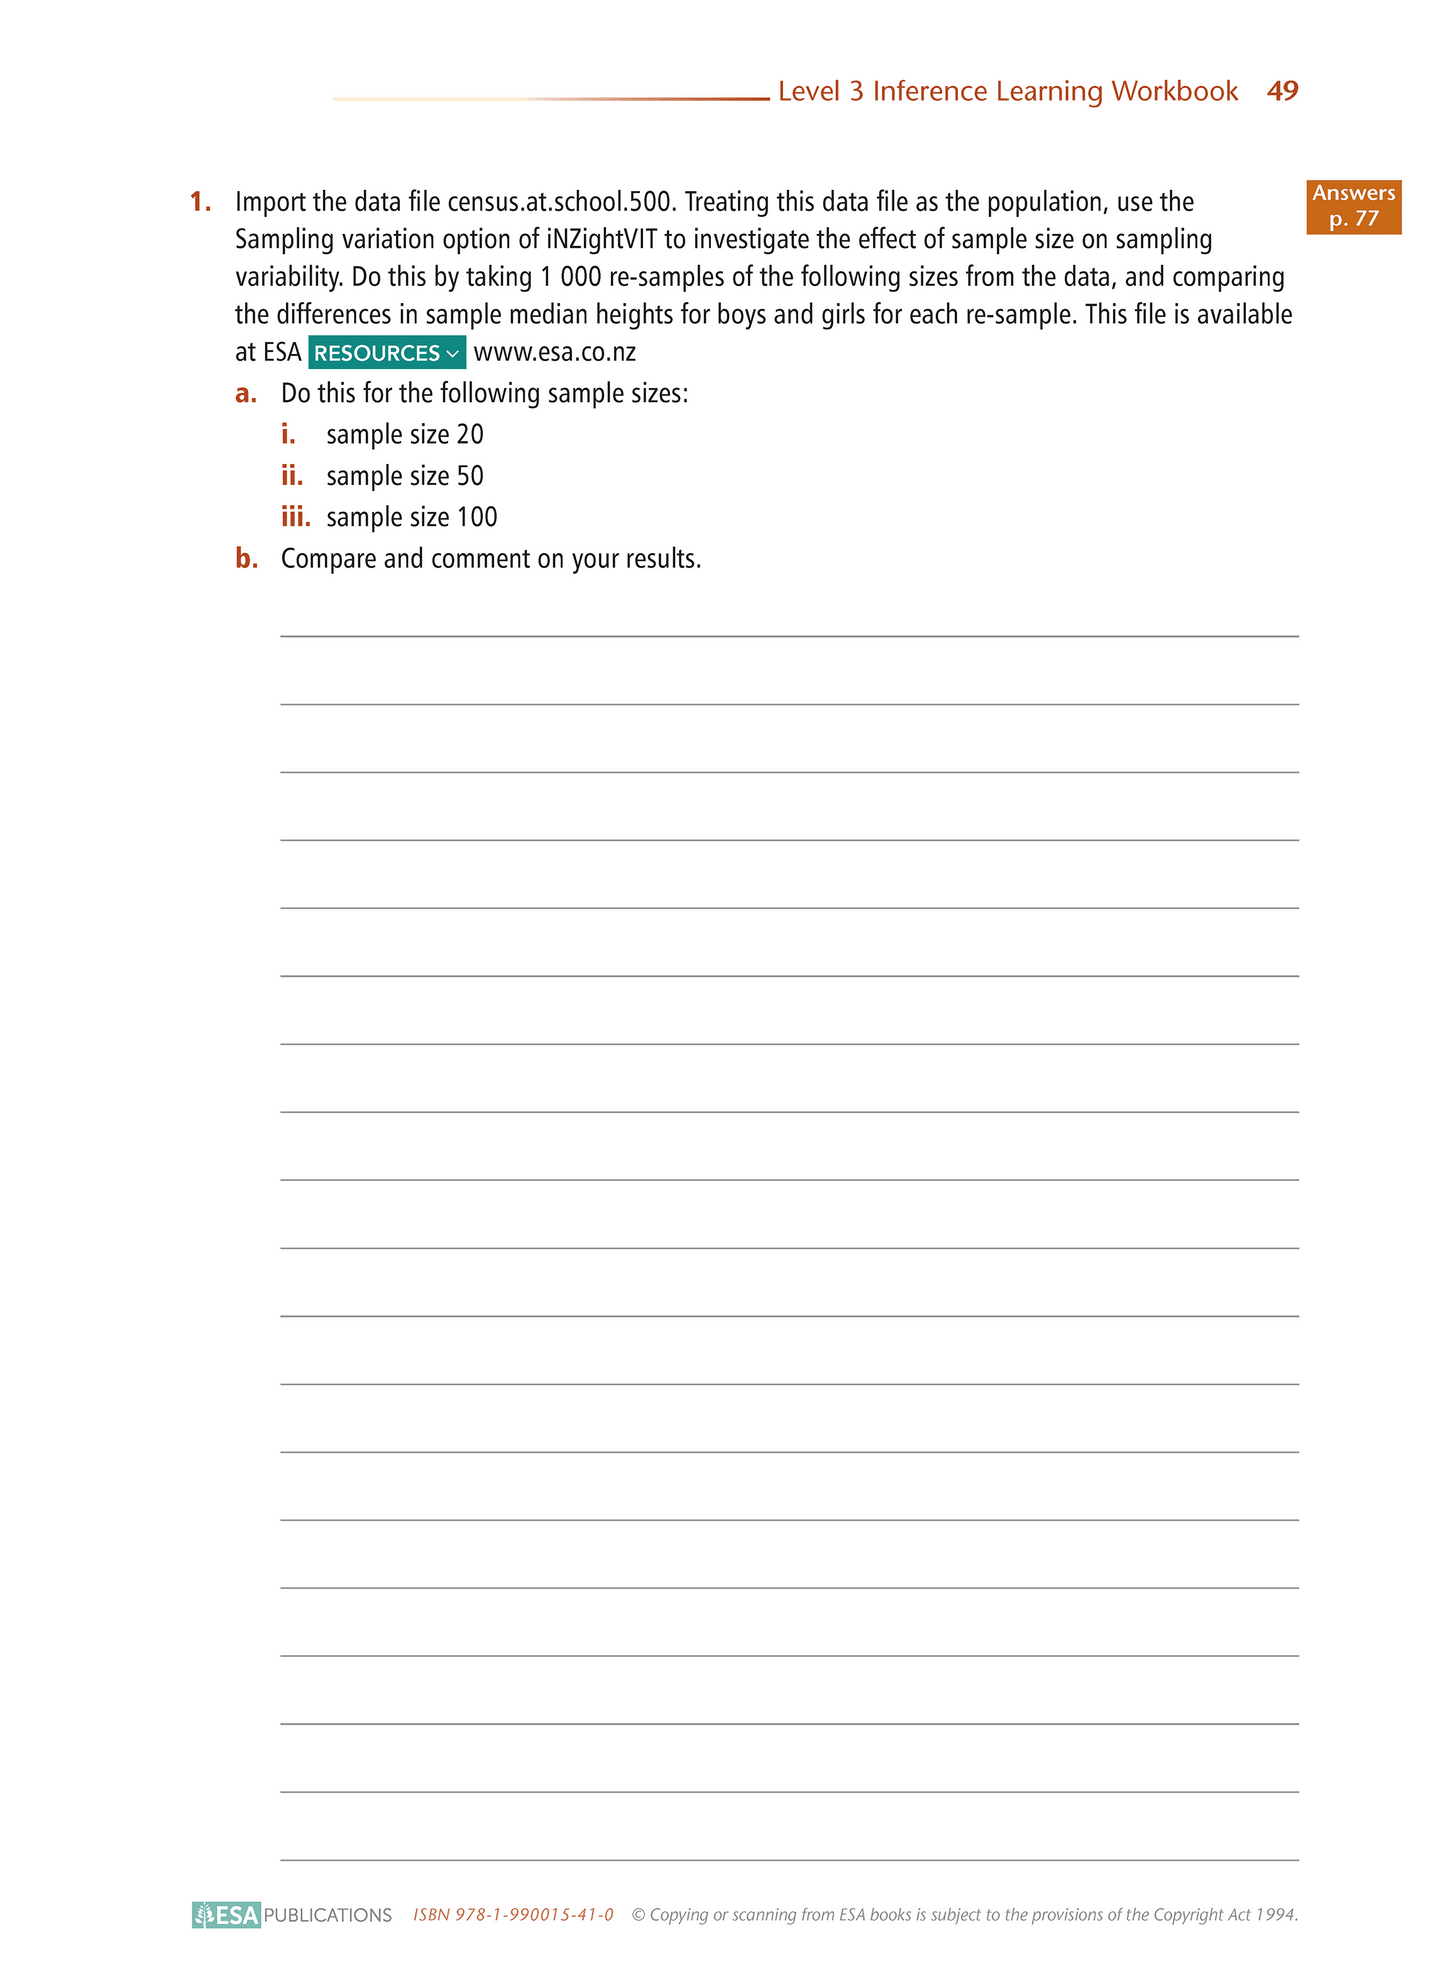 Level 3 Inference 3.10 Learning Workbook